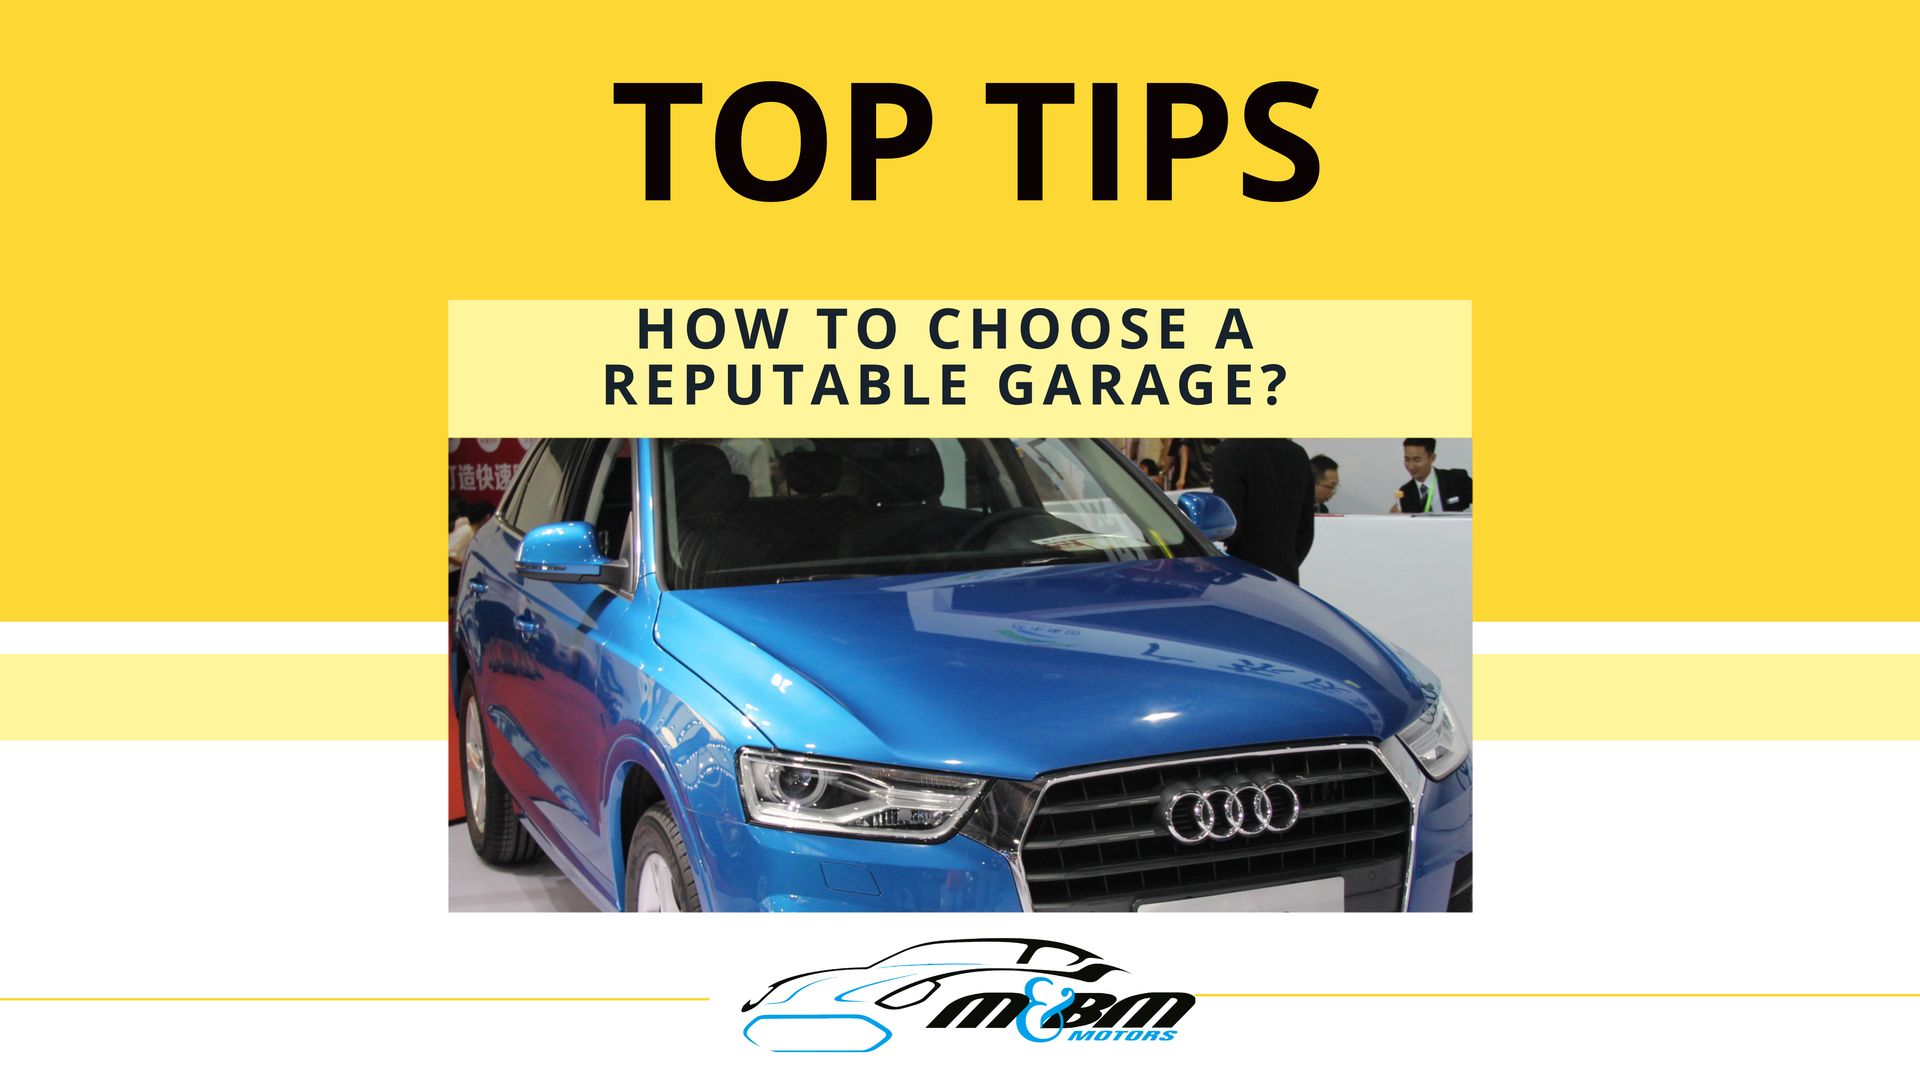 Top tips on how to choose a reputable garage?